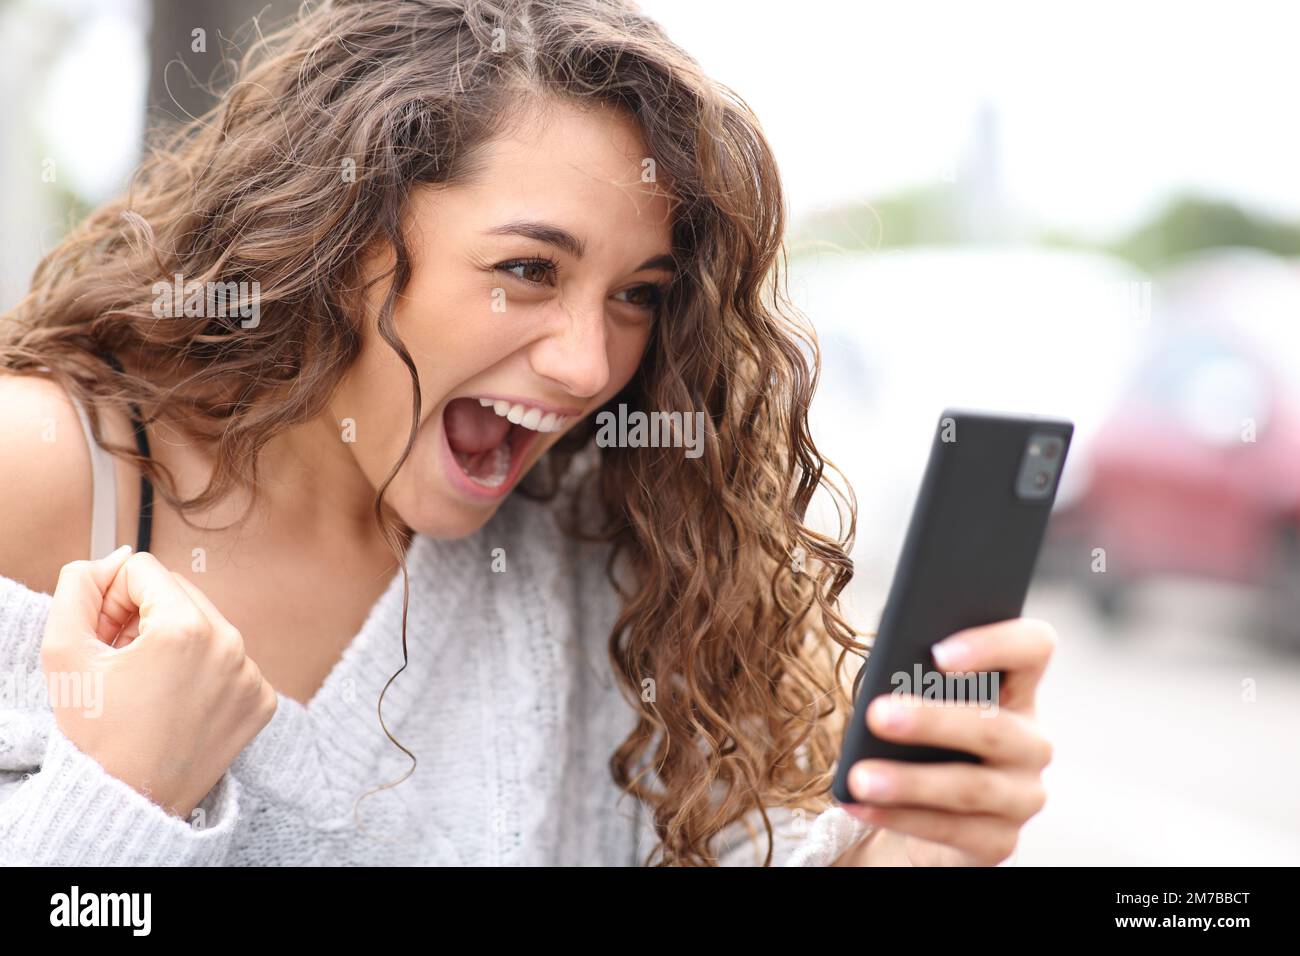 Excited woman celebrating checking phone in the street Stock Photo